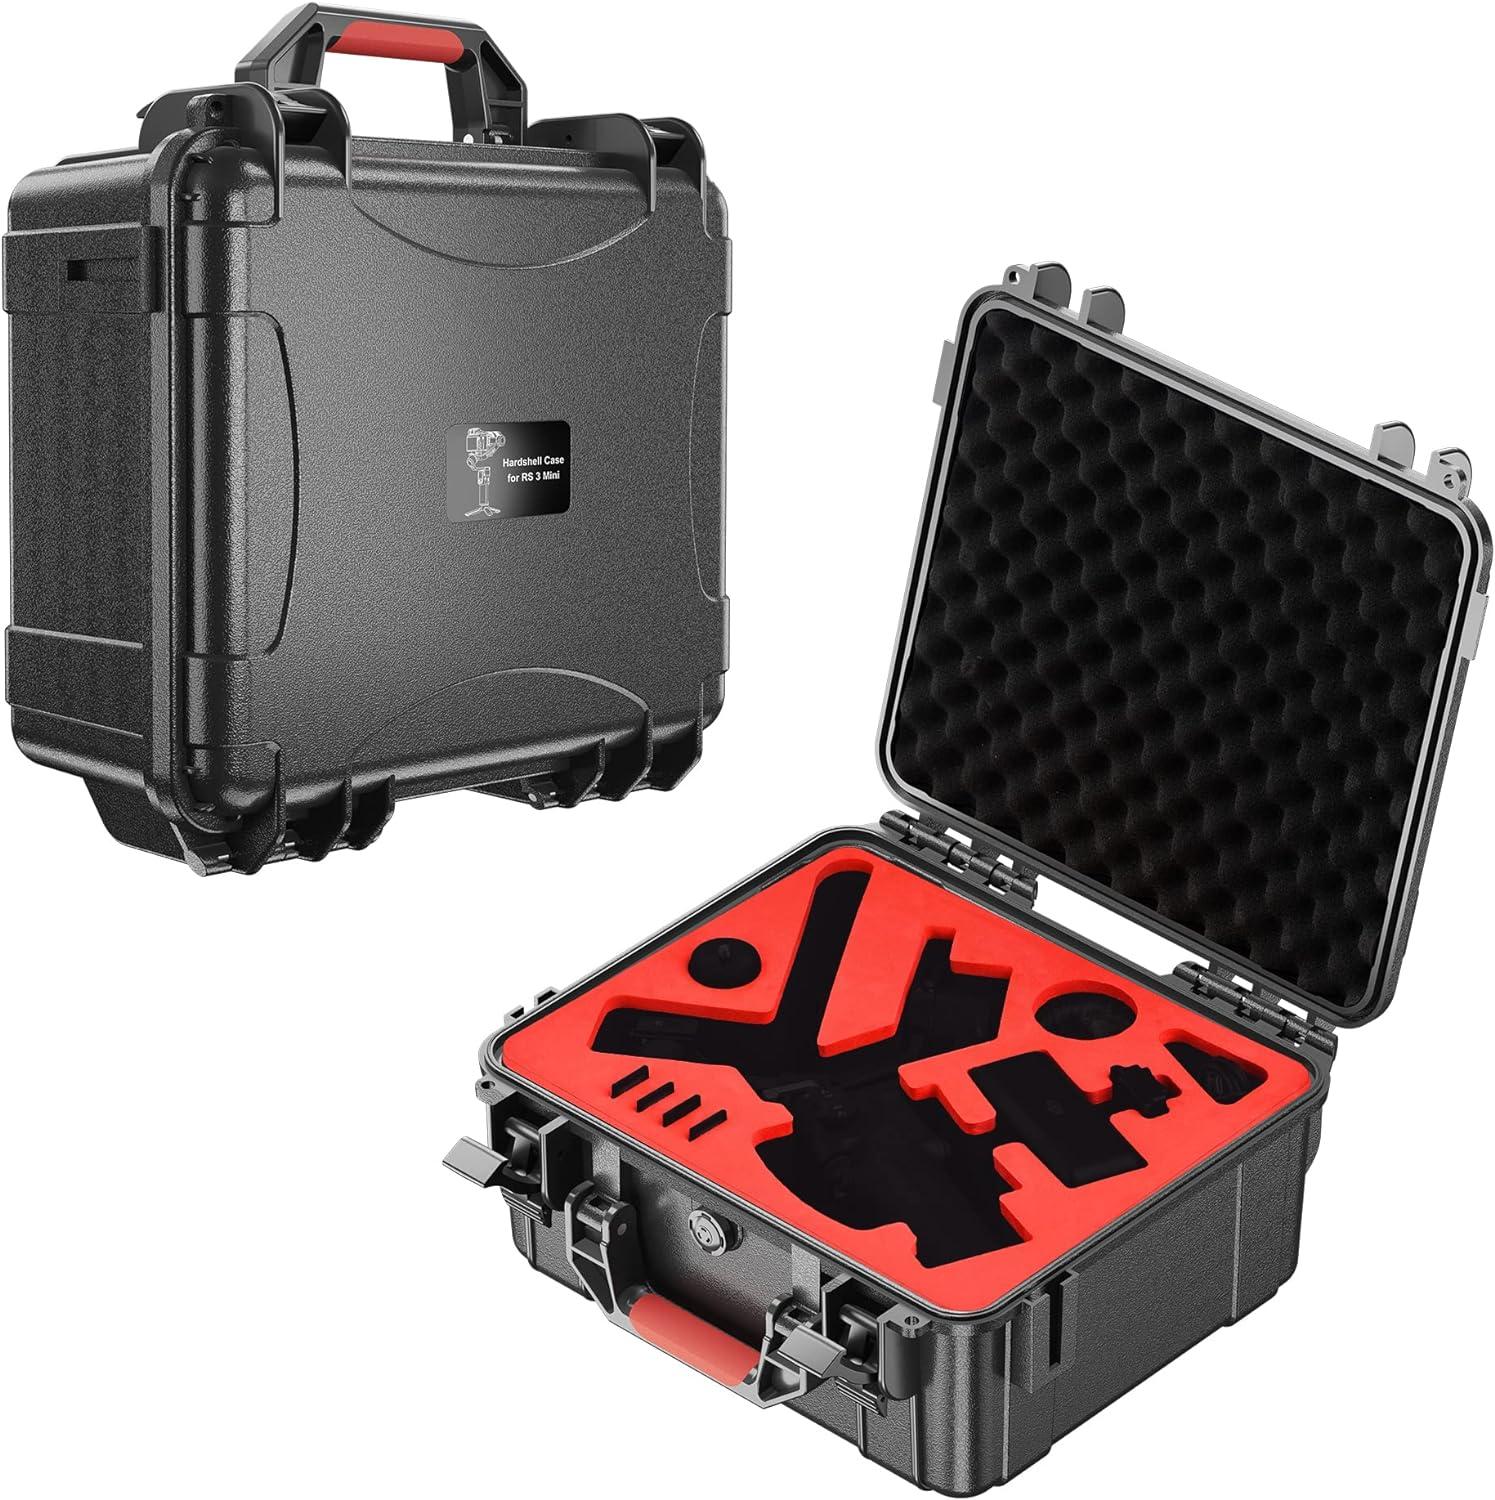 STARTRC RS 3 Mini Case Waterproof Hard Carrying Case for DJI RS 3 Mini  Gimbal Lightweight Stabilizer Accessories RS3 Mini Case